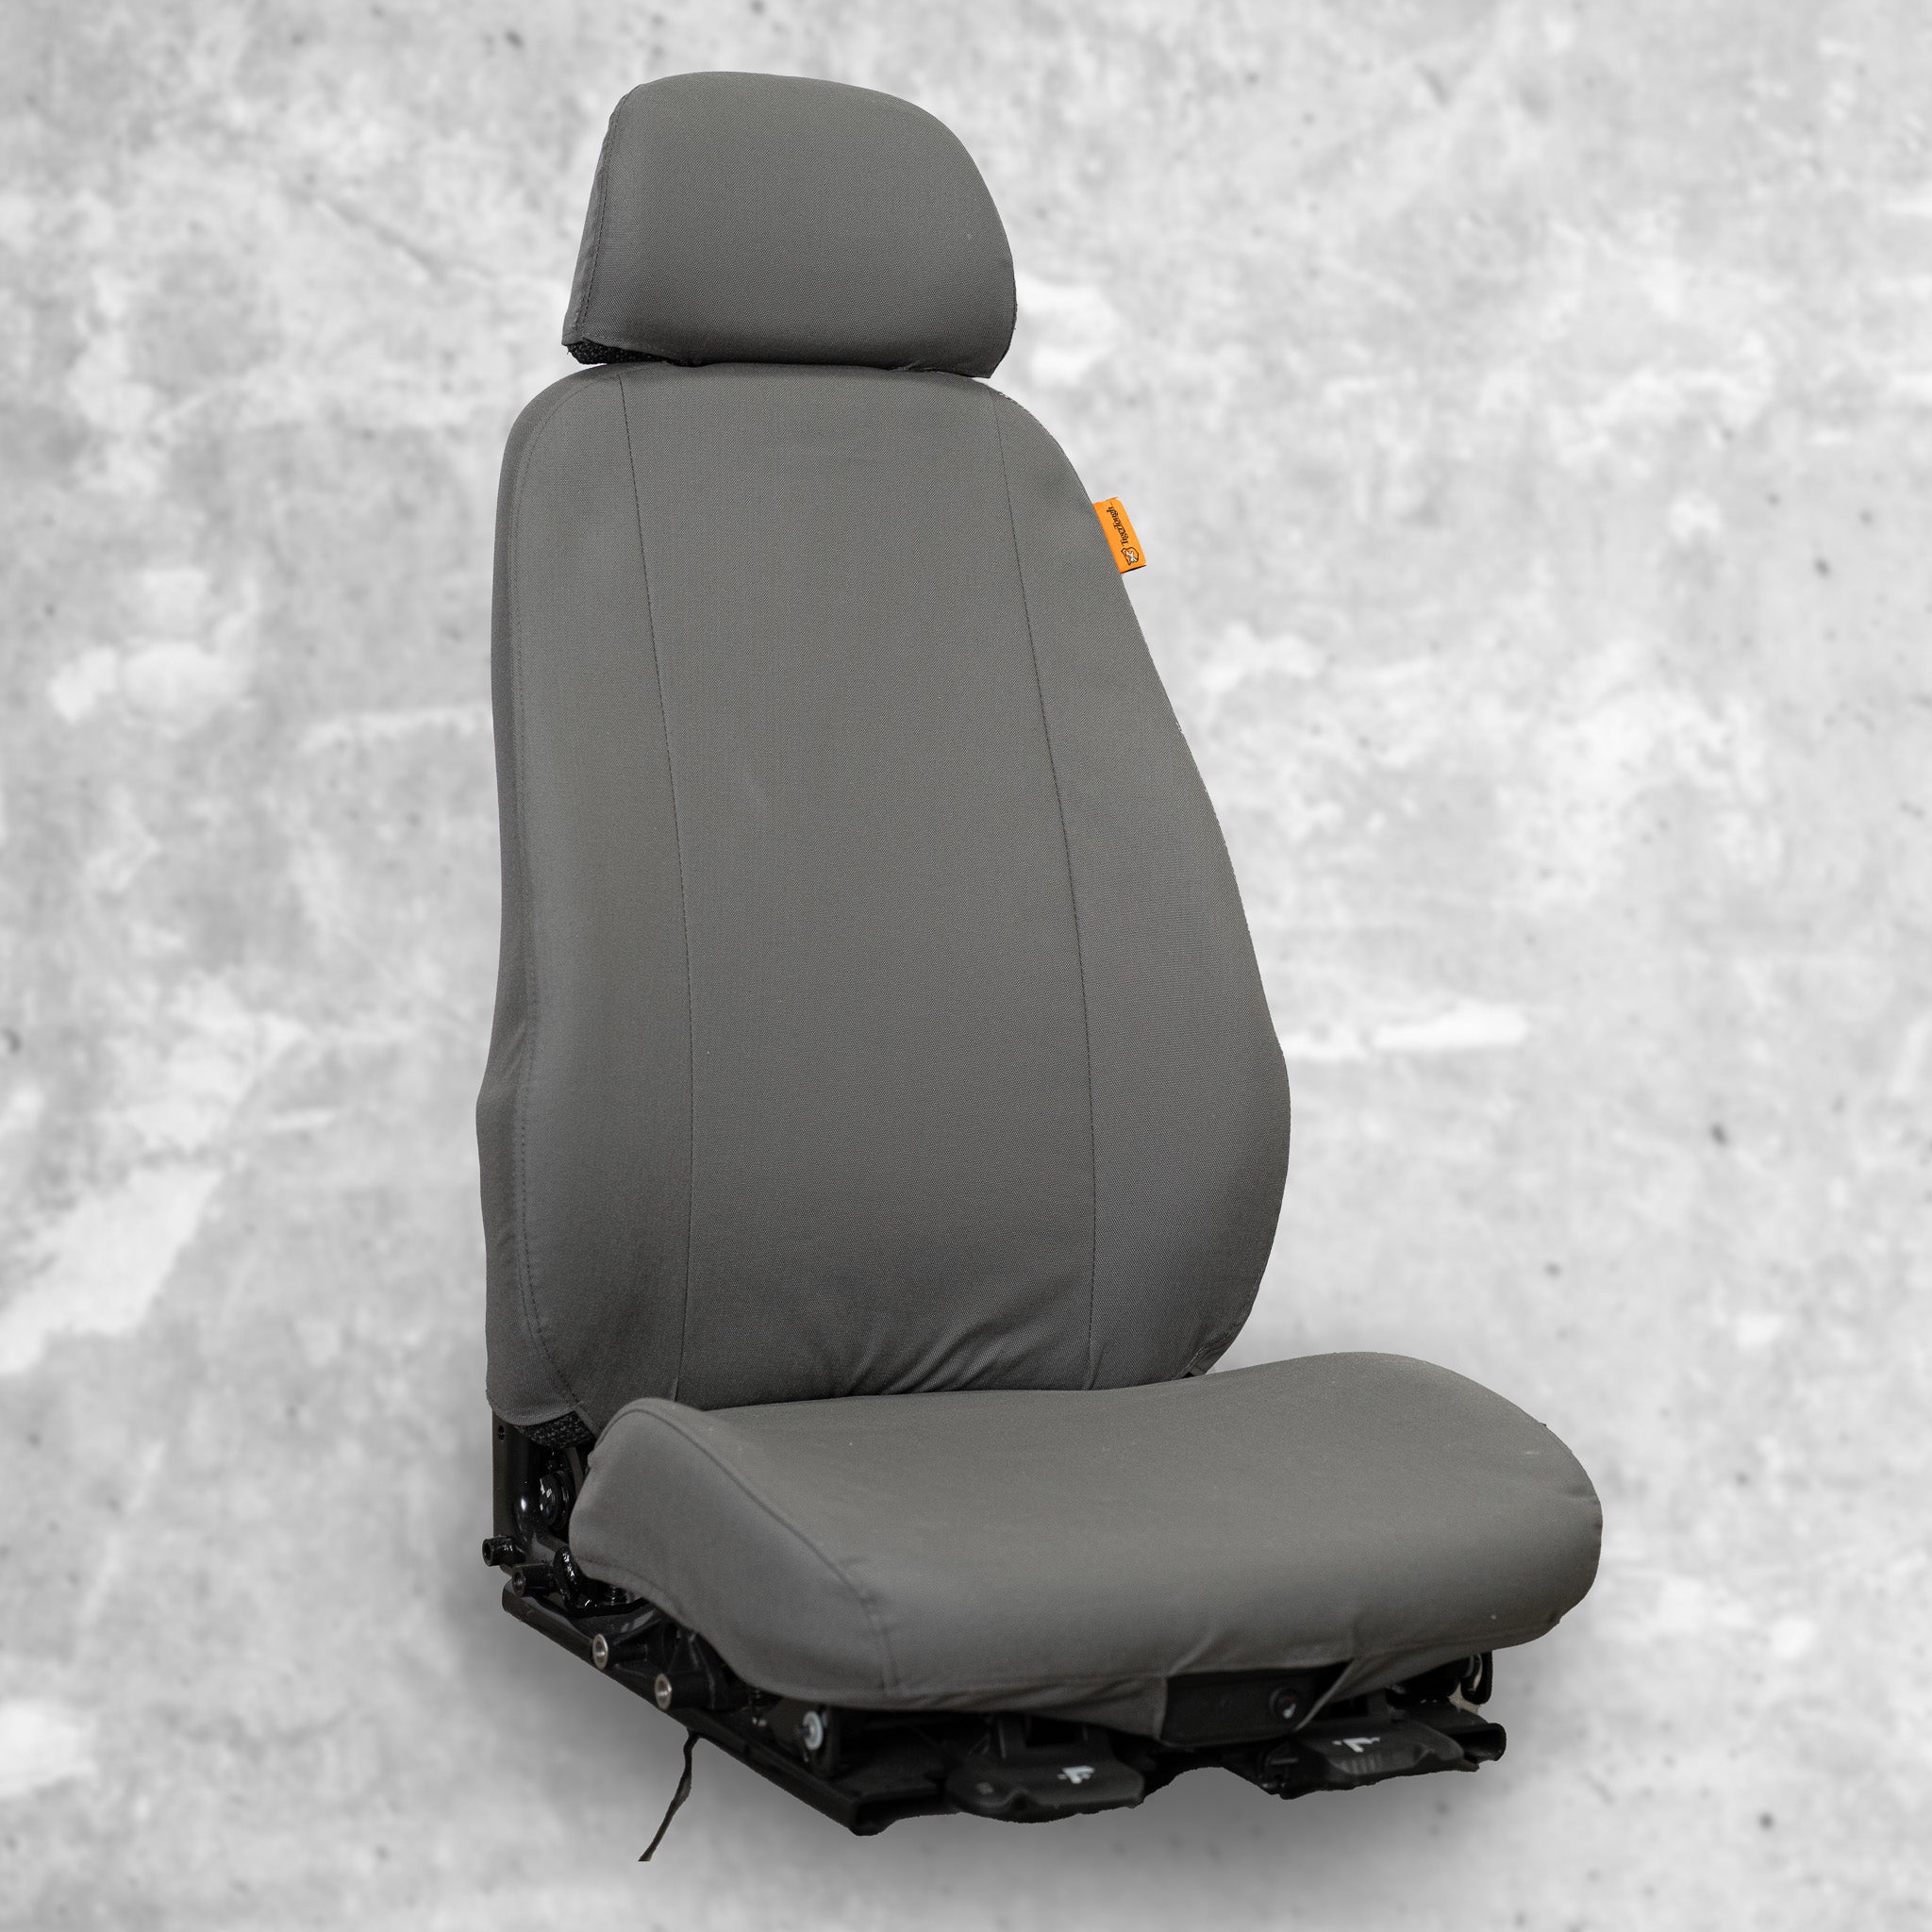 TigerTough Seat Cover for a heavy equipment seat. This picture shows the great fit and the separate back, bottom, and headrest pieces